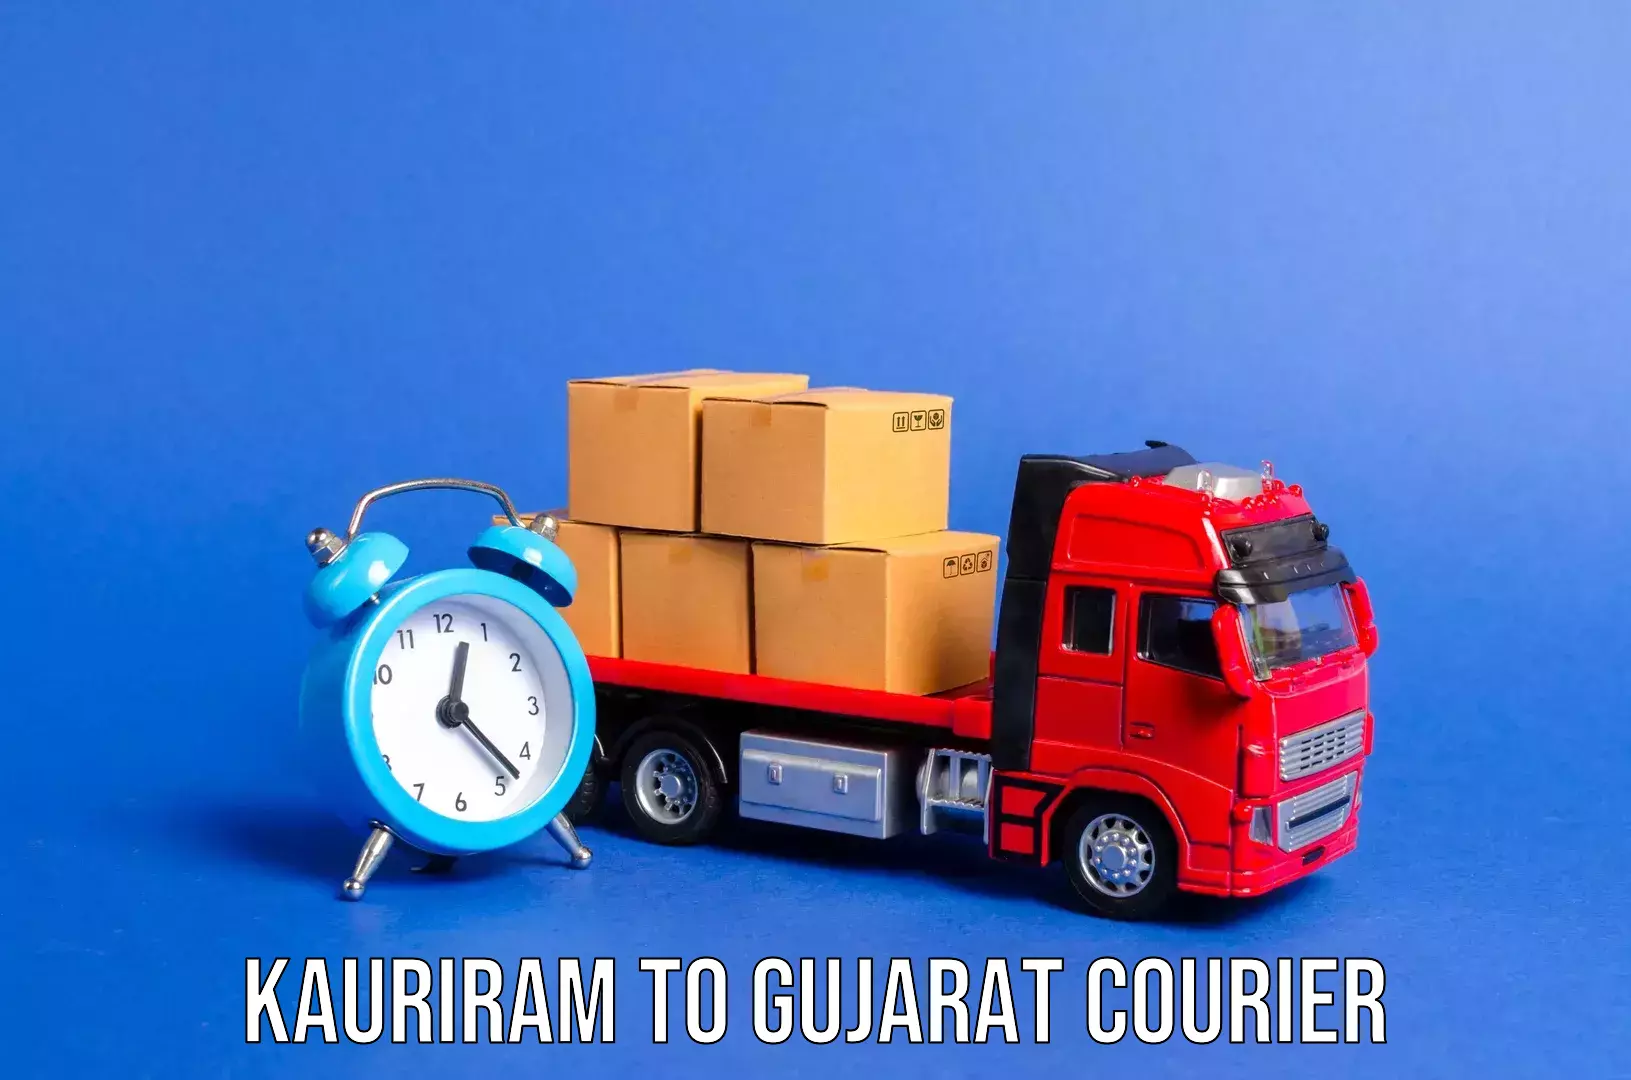 Express luggage delivery Kauriram to Gujarat